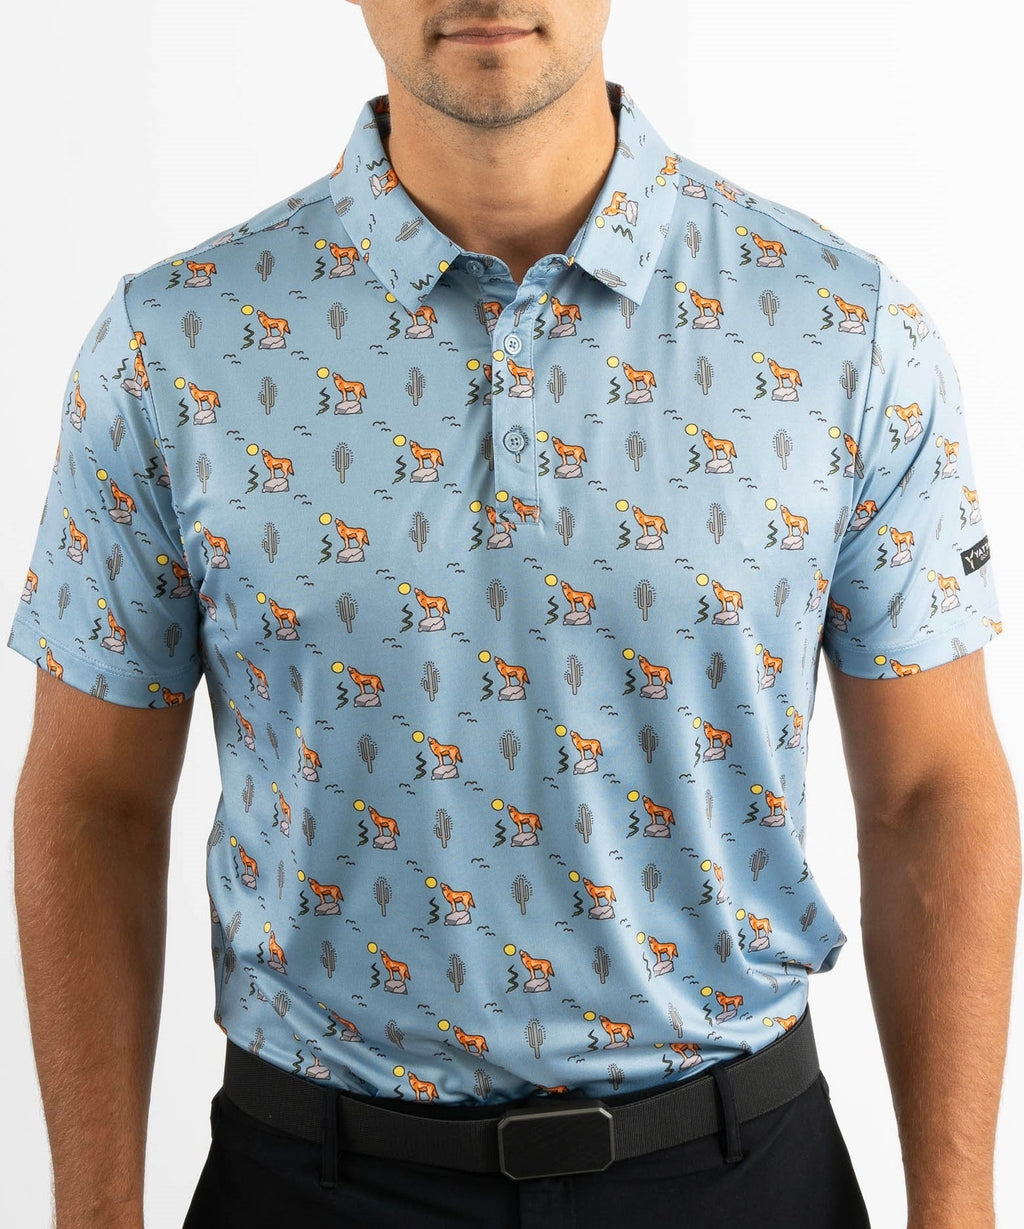 Golf Polos for Men. Seriously Fantastic Golf Shirts. Only $39.95. – Page 2  – Yatta Golf